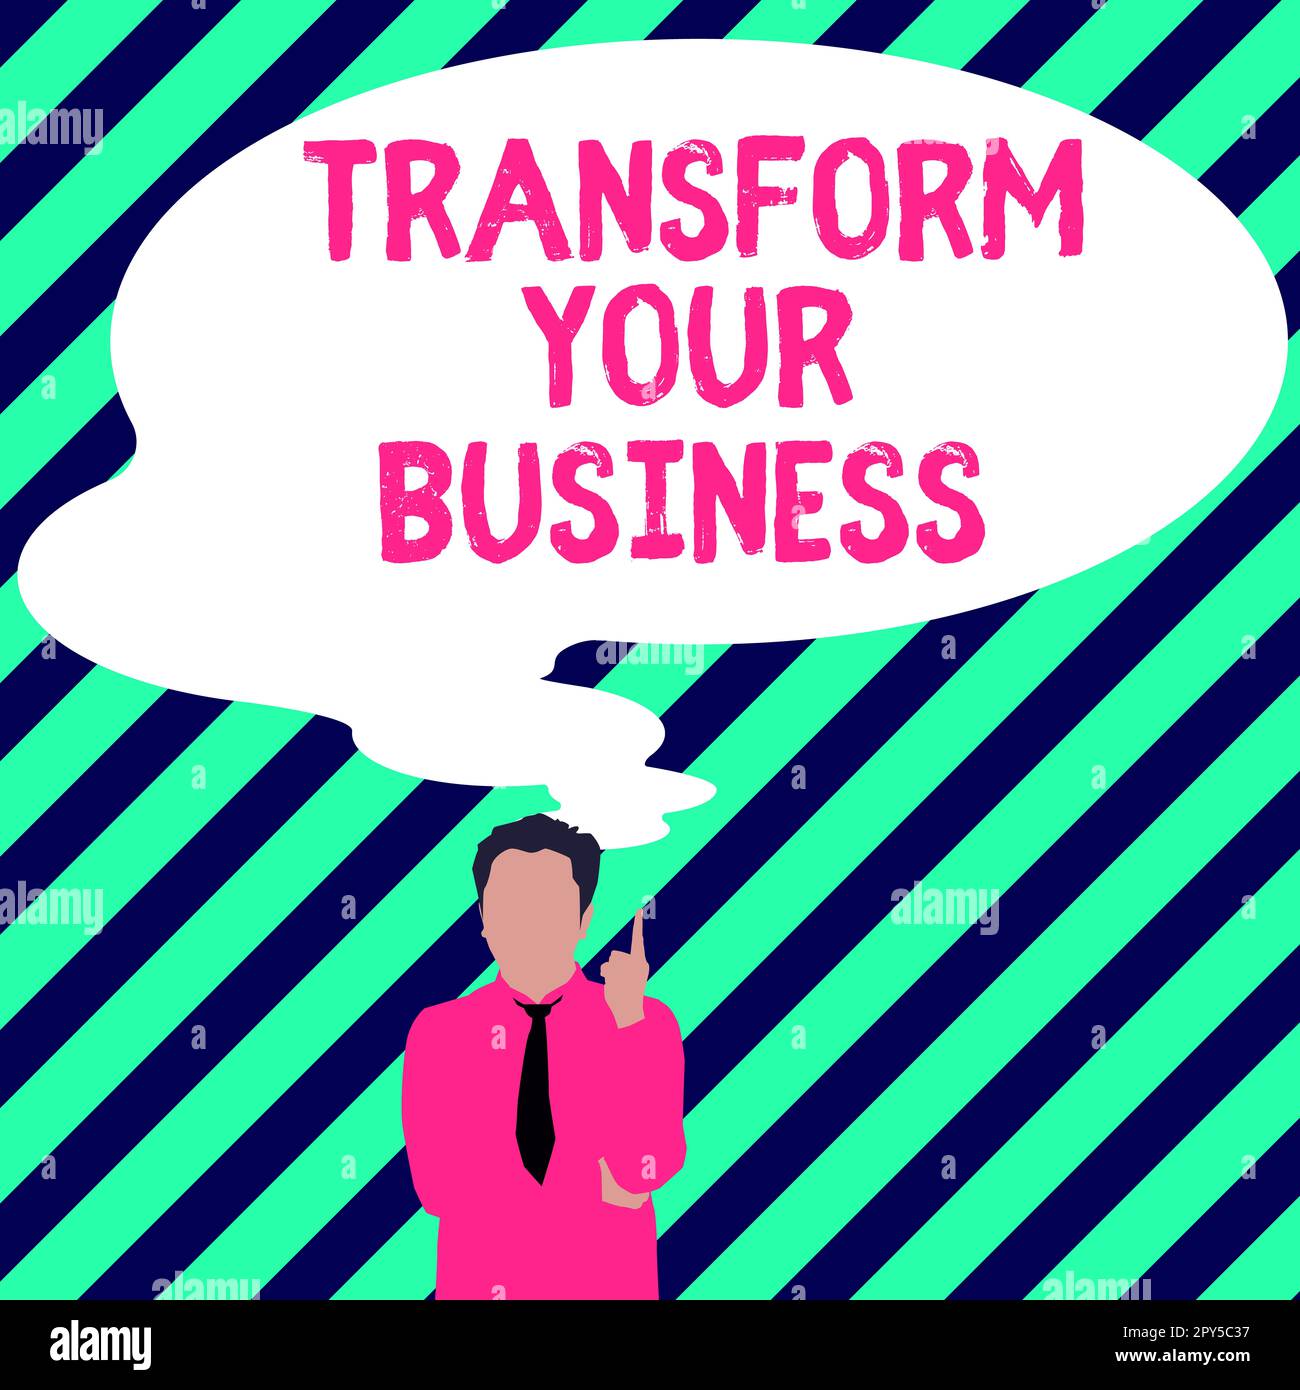 Conceptual caption Transform Your Business. Business concept Modify energy on innovation and sustainable growth Stock Photo